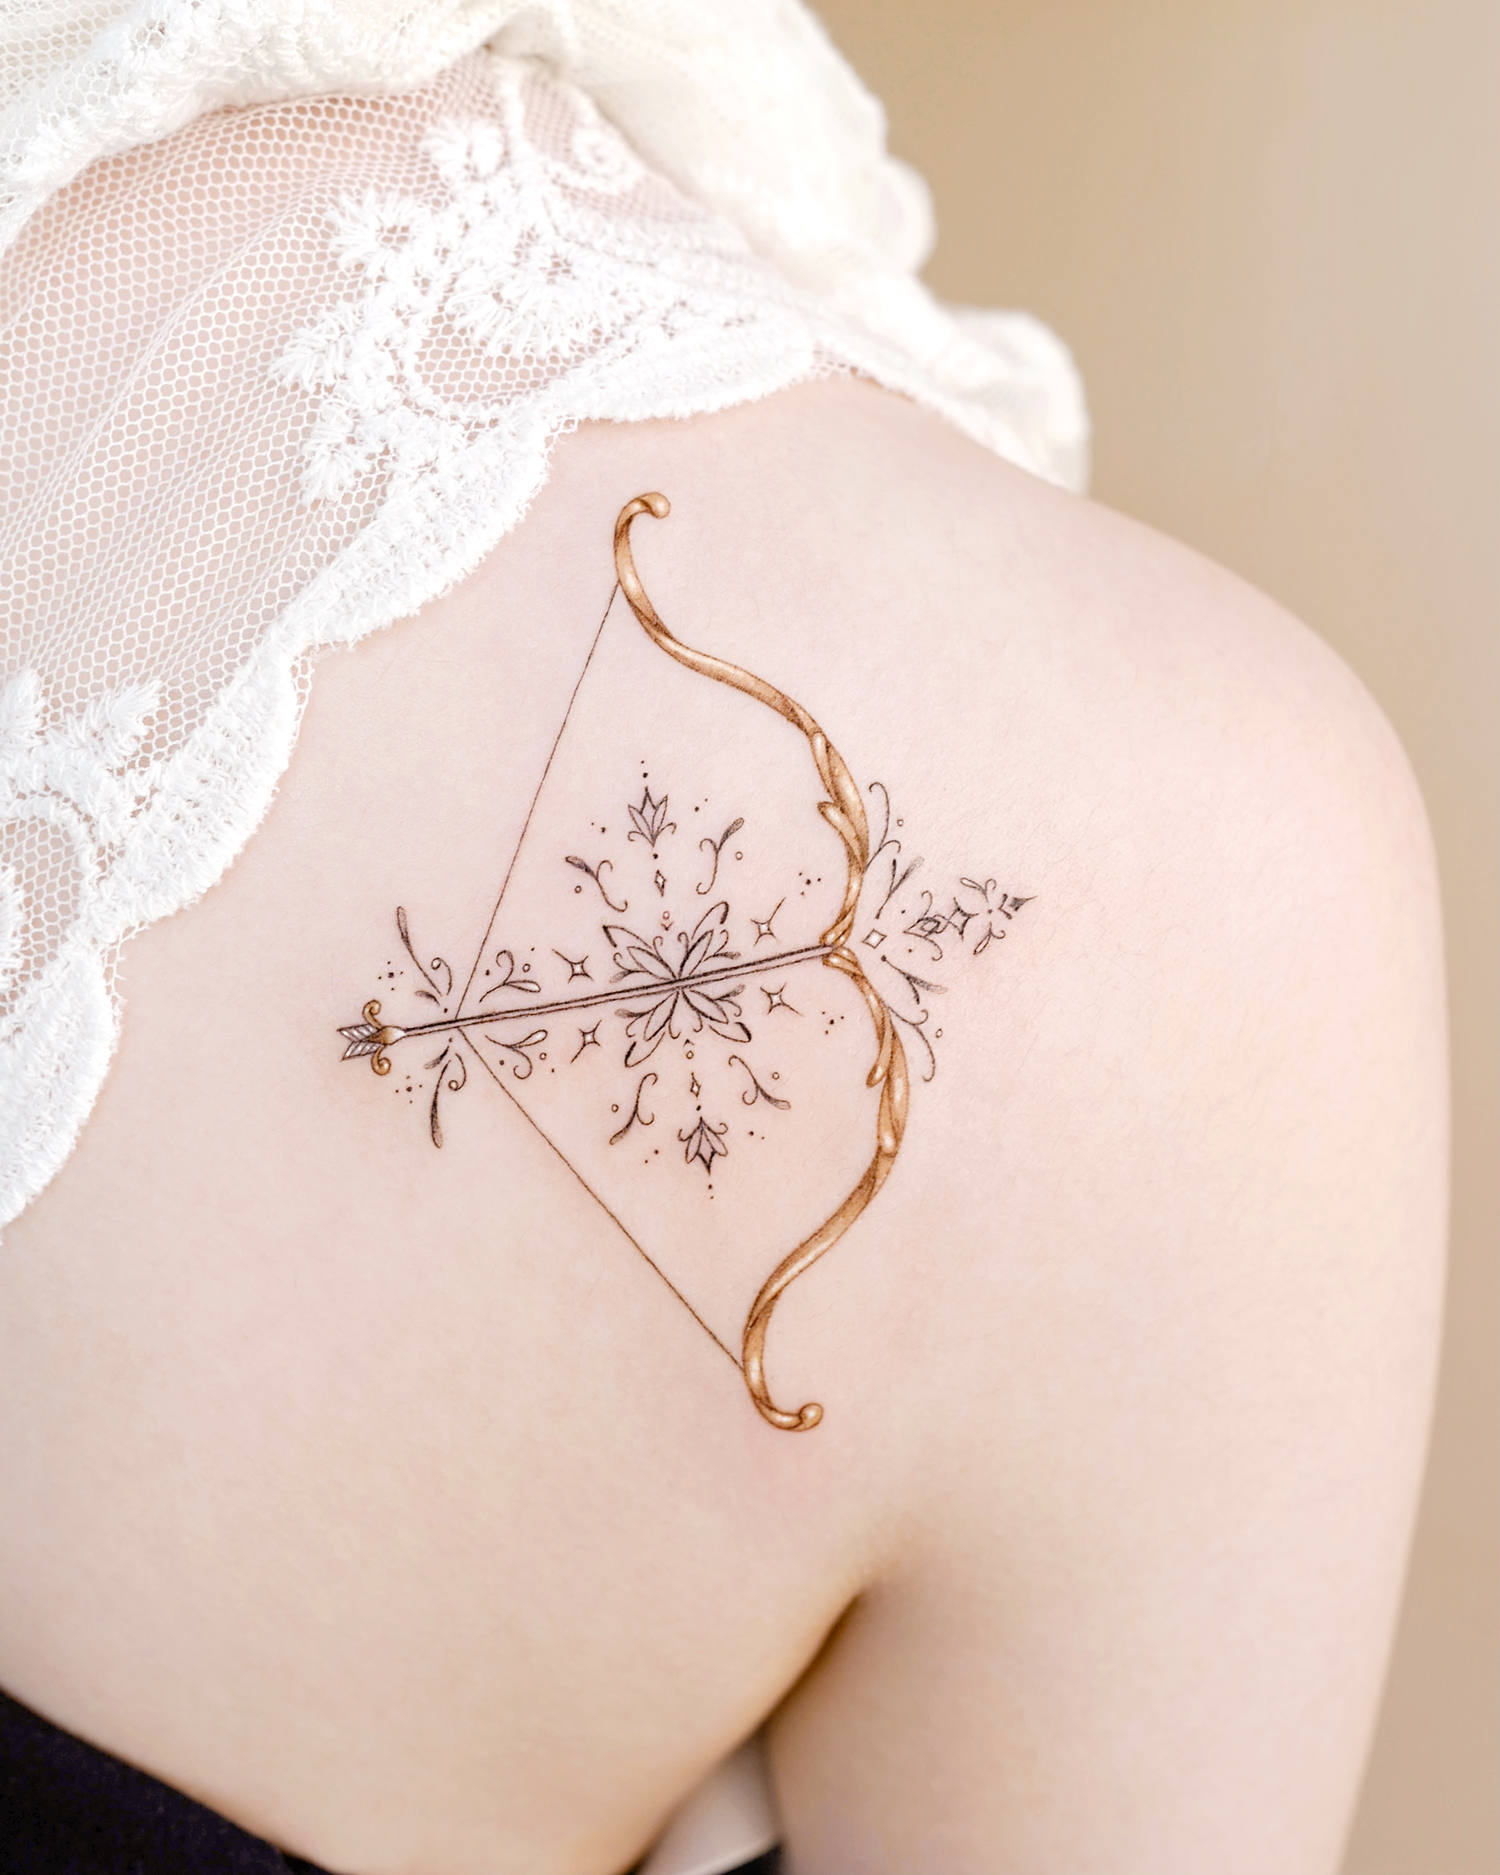 A delicate cross and bow in micro-tattoo style.